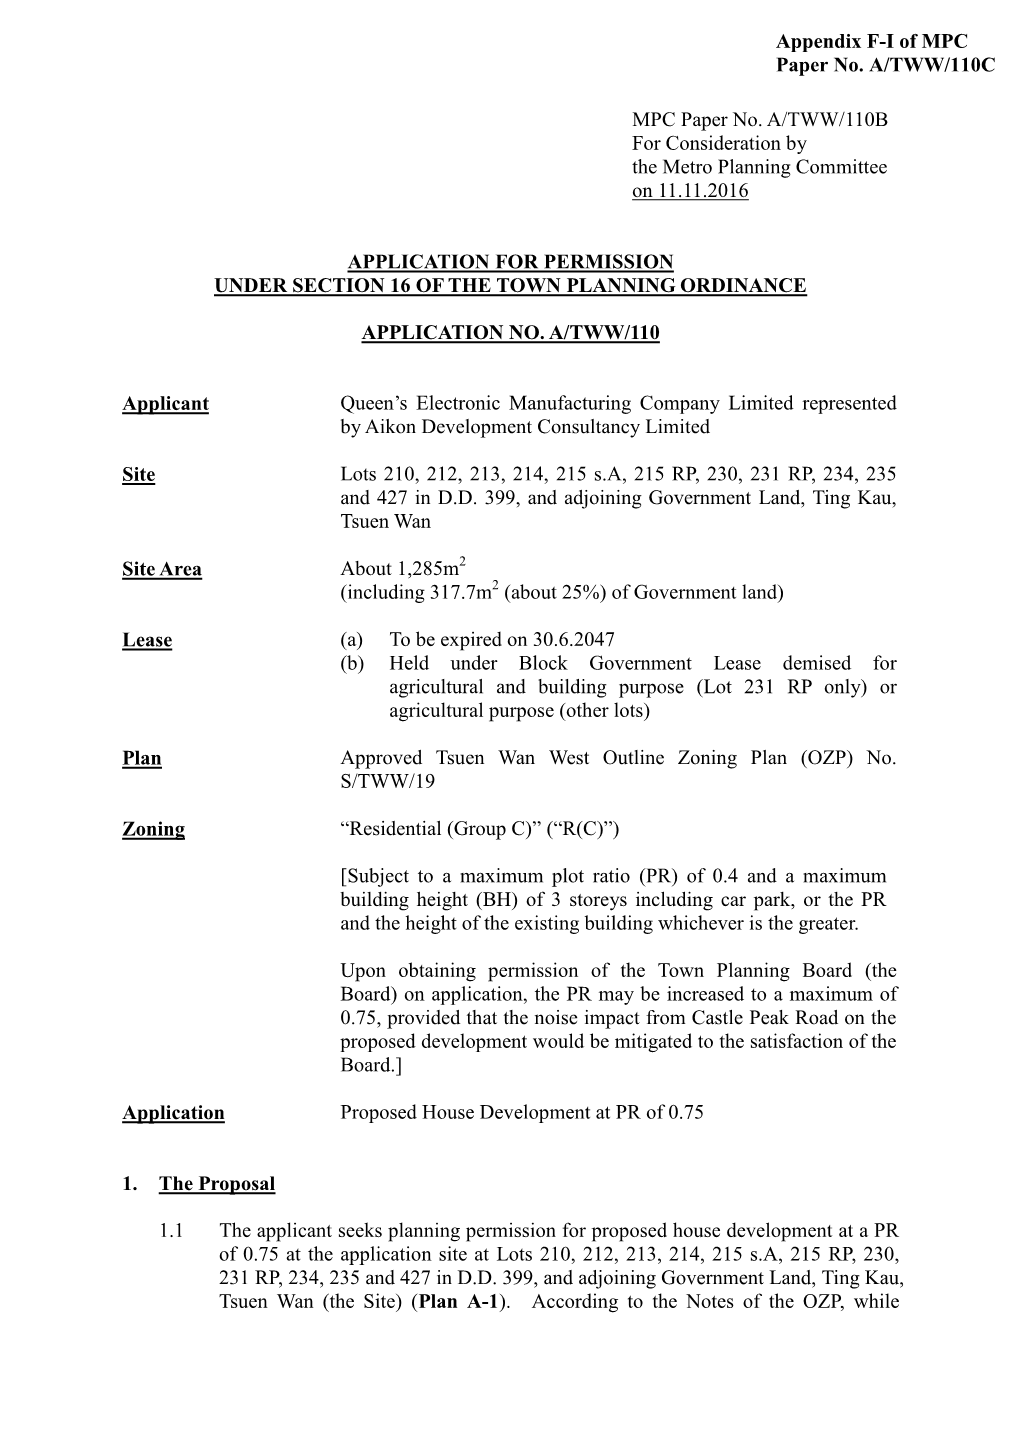 MPC Paper No. A/TWW/110B for Consideration by the Metro Planning Committee on 11.11.2016